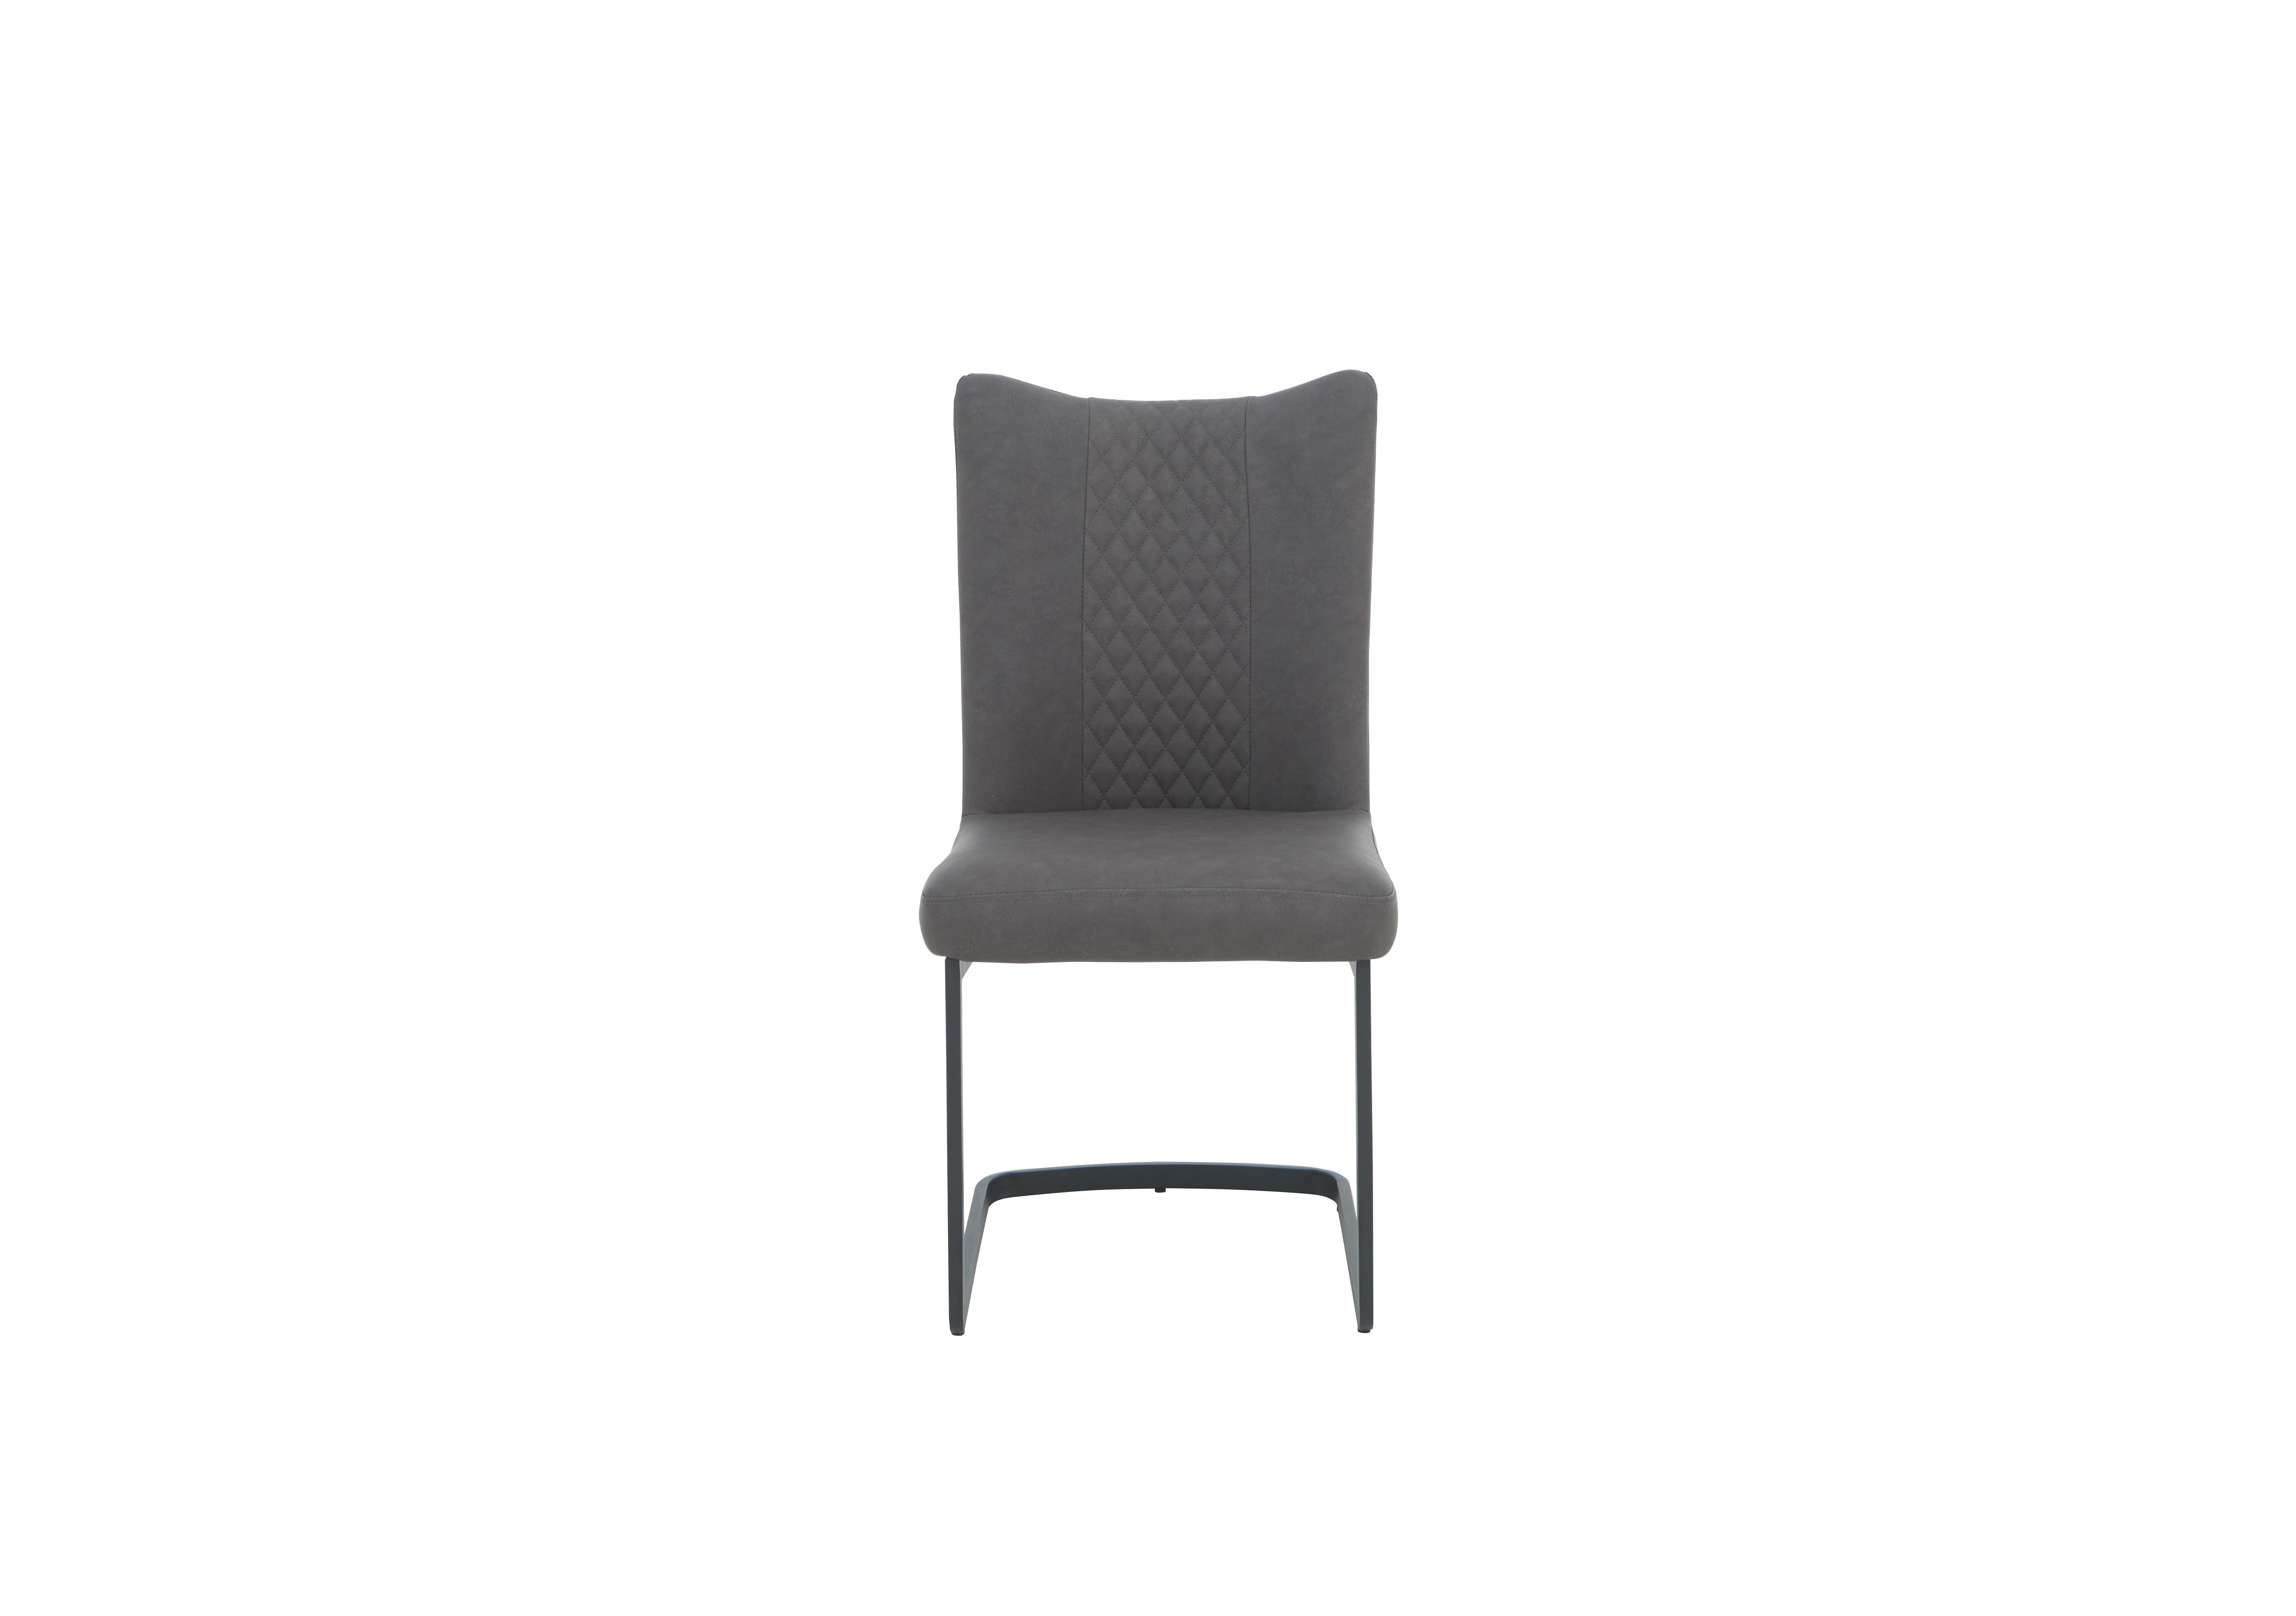 Loki Cantilever Dining Chair in Vintage Grey on Furniture Village